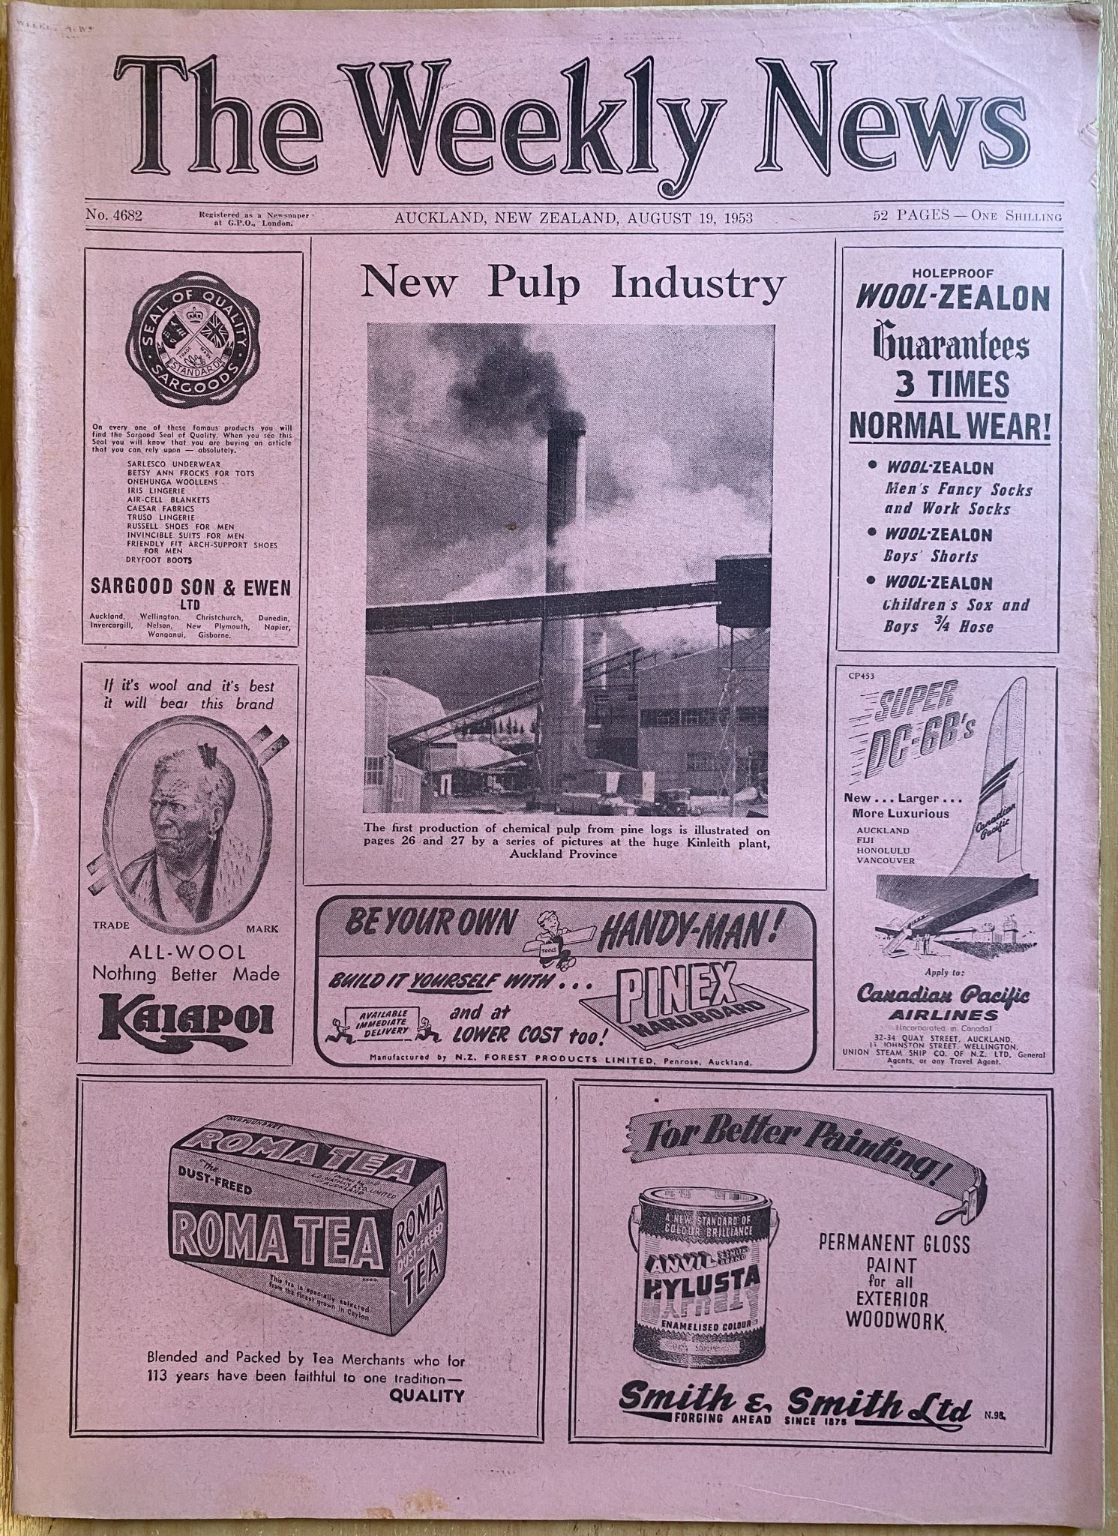 OLD NEWSPAPER: The Weekly News - No. 4682, 19 August 1953